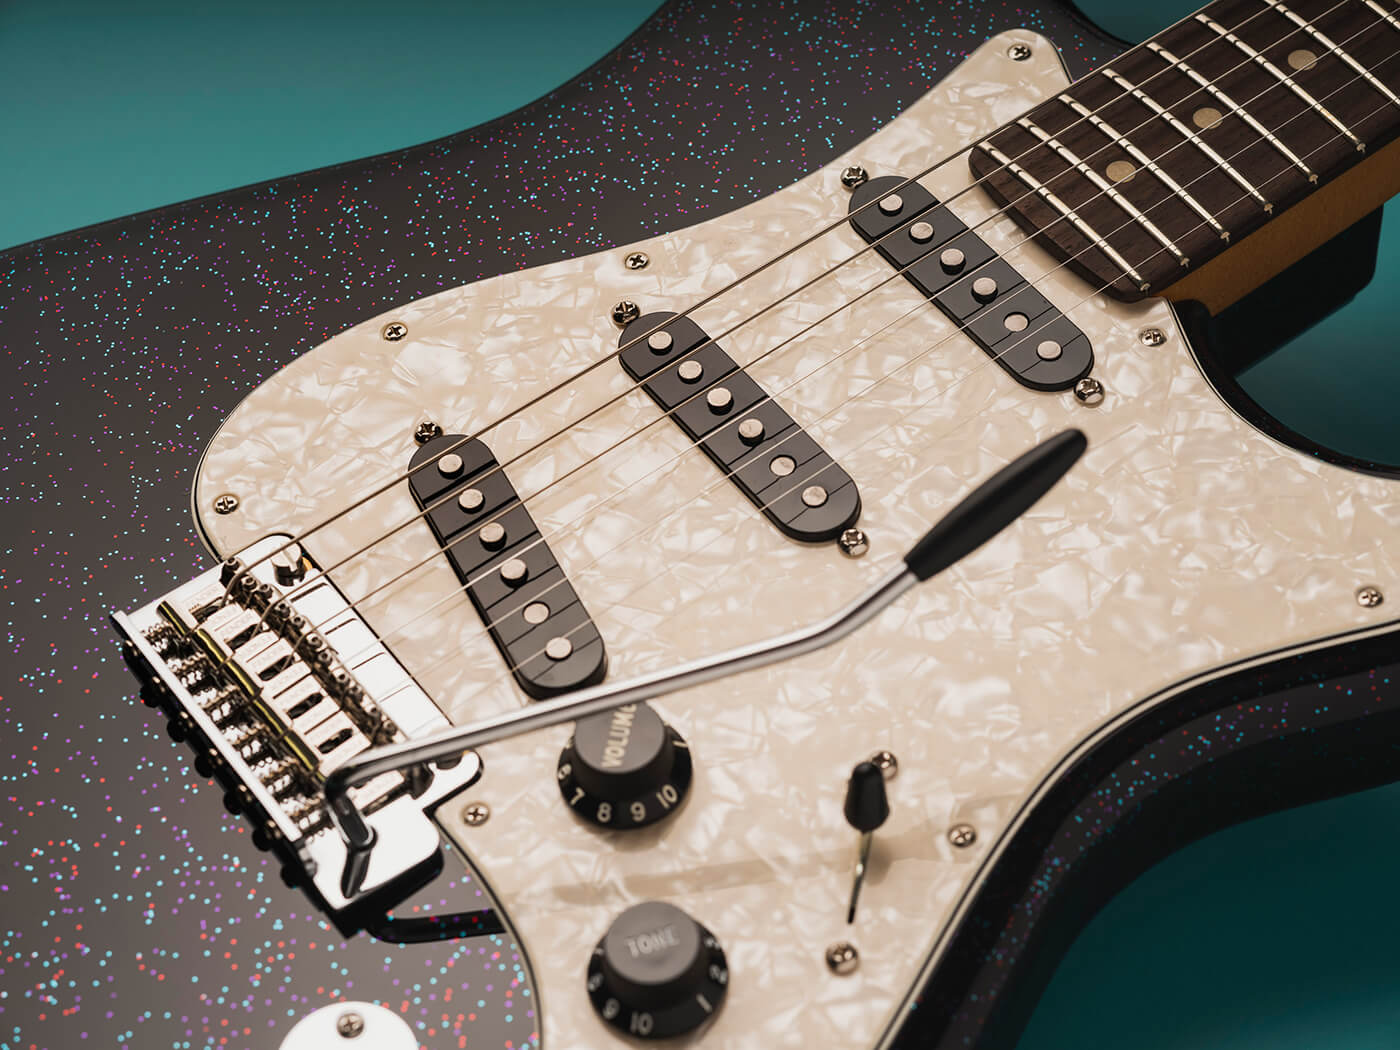 70th Anniversary Player Stratocaster body, photo by Adam Gasson